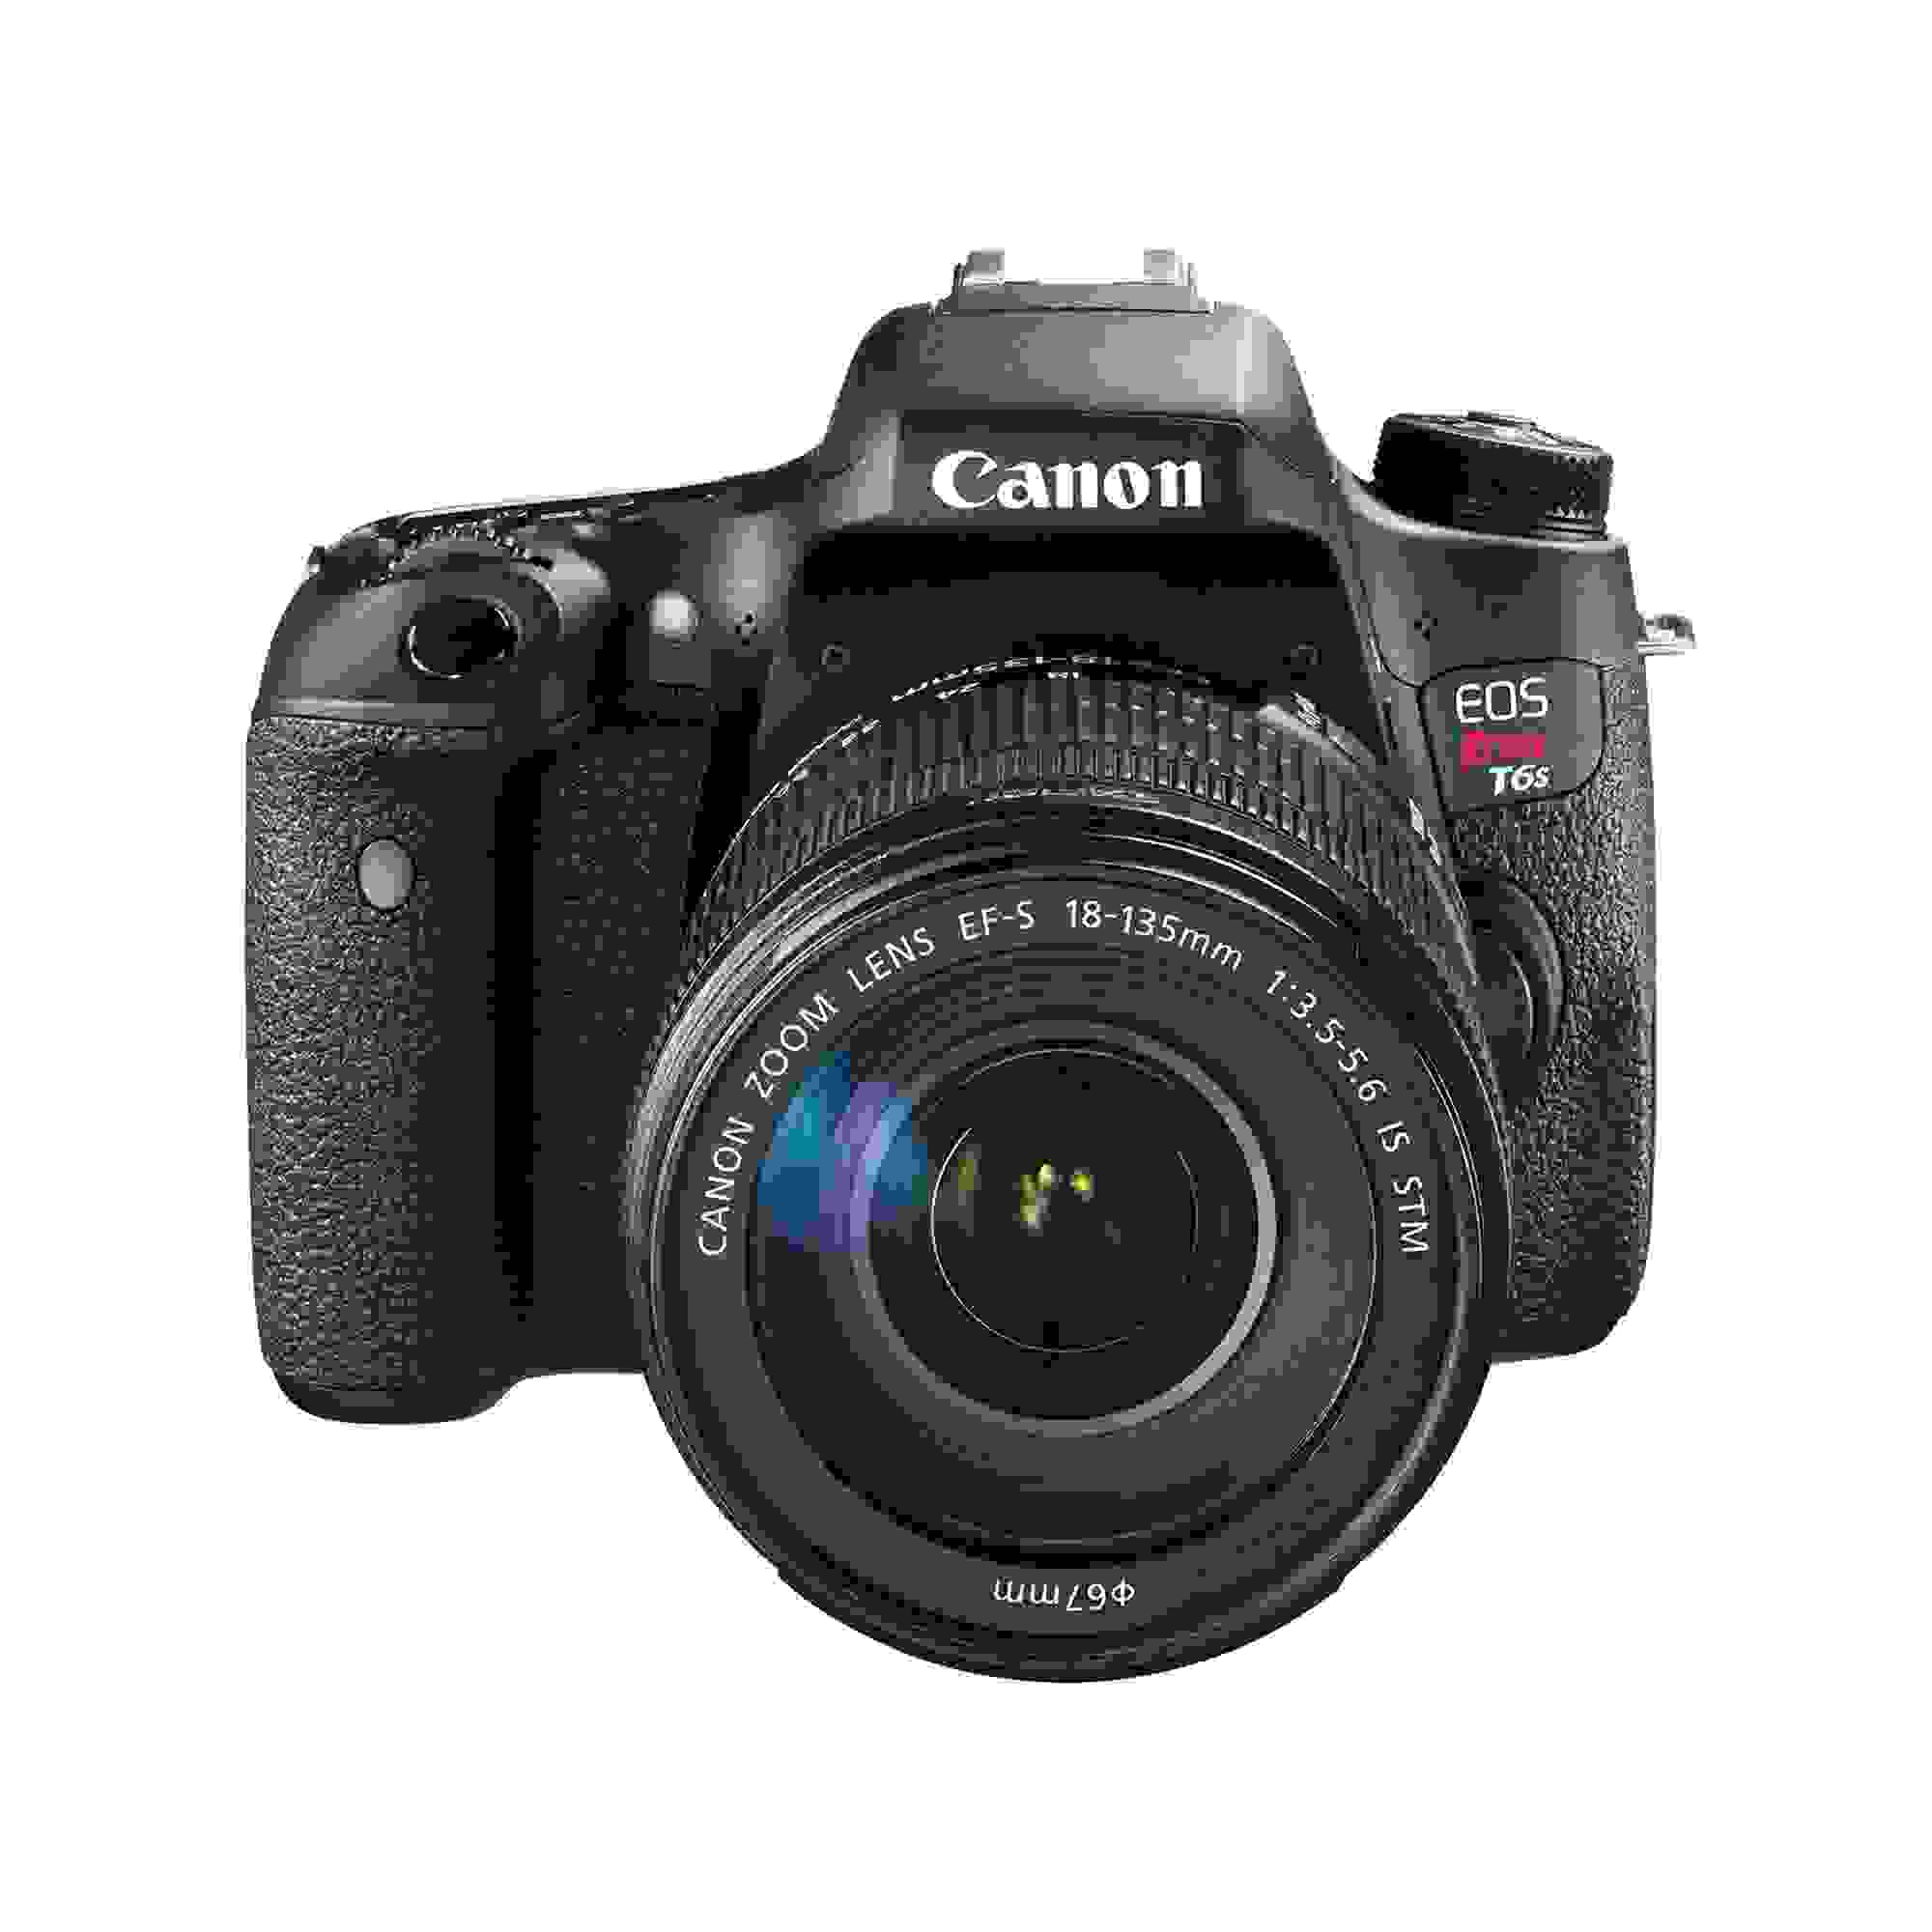 CANON EOS T6S W/ EF 18-135MM IS STM LENS